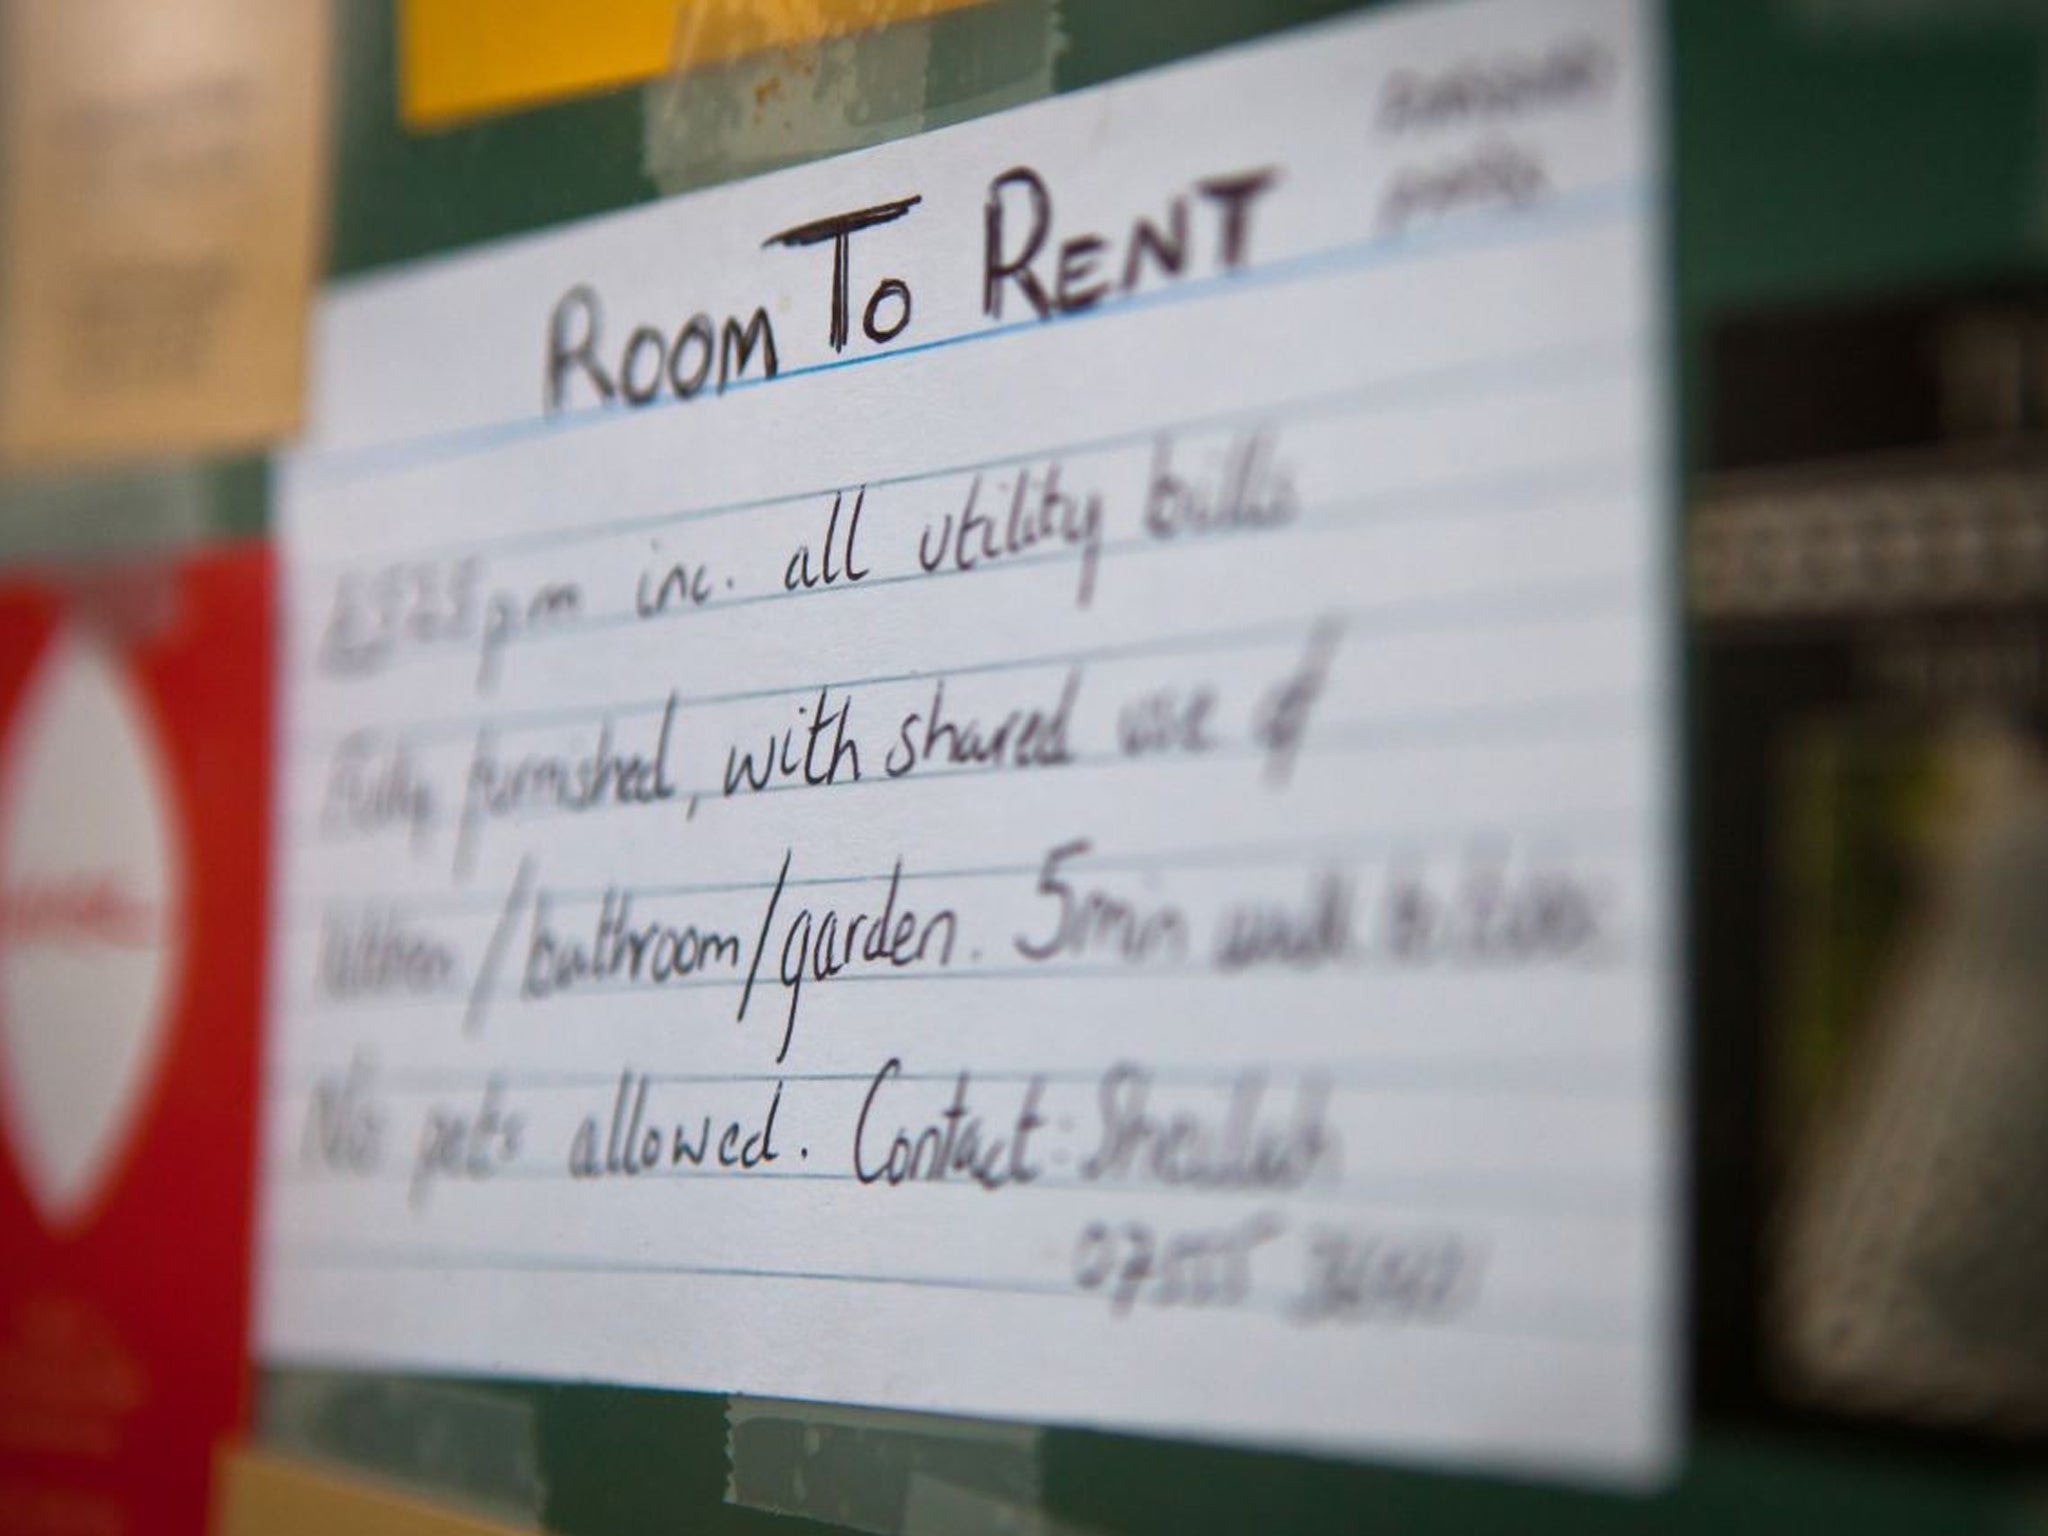 You can earn up to £4,250 a year tax free by renting out a spare room